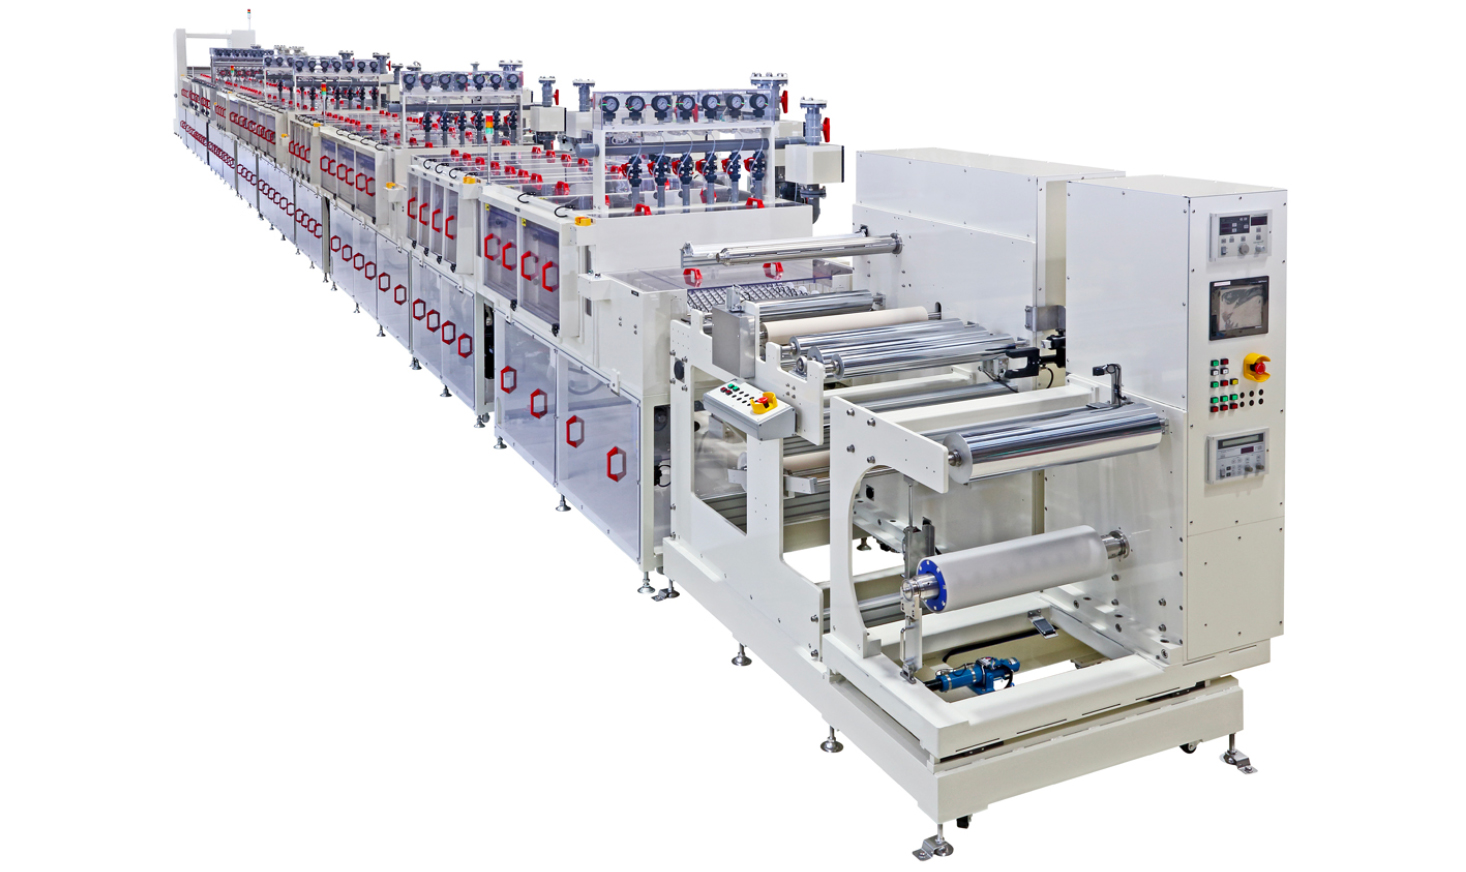 Touch panel manufacturing equipment